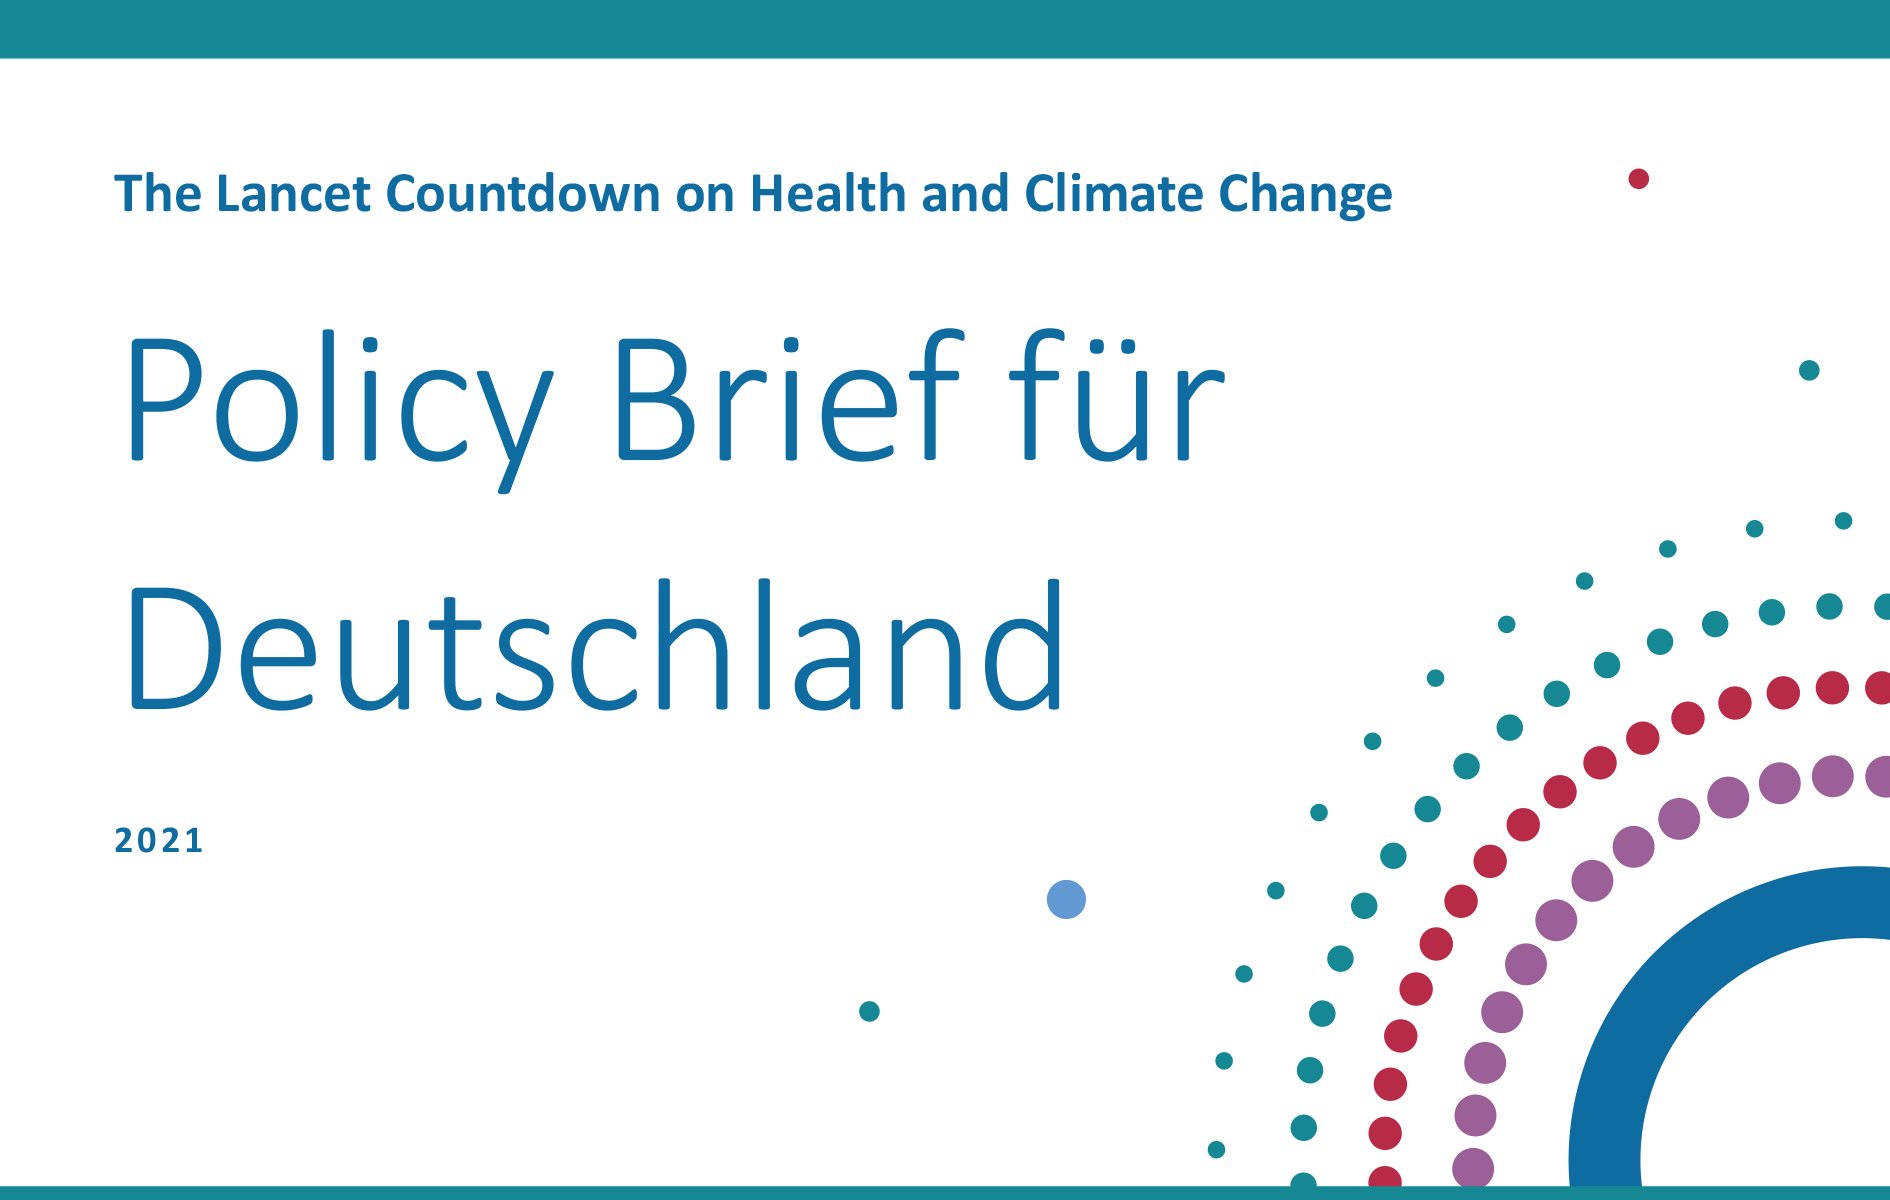 New Lancet Countdown Policy Brief for Germany confirms considerable need for action